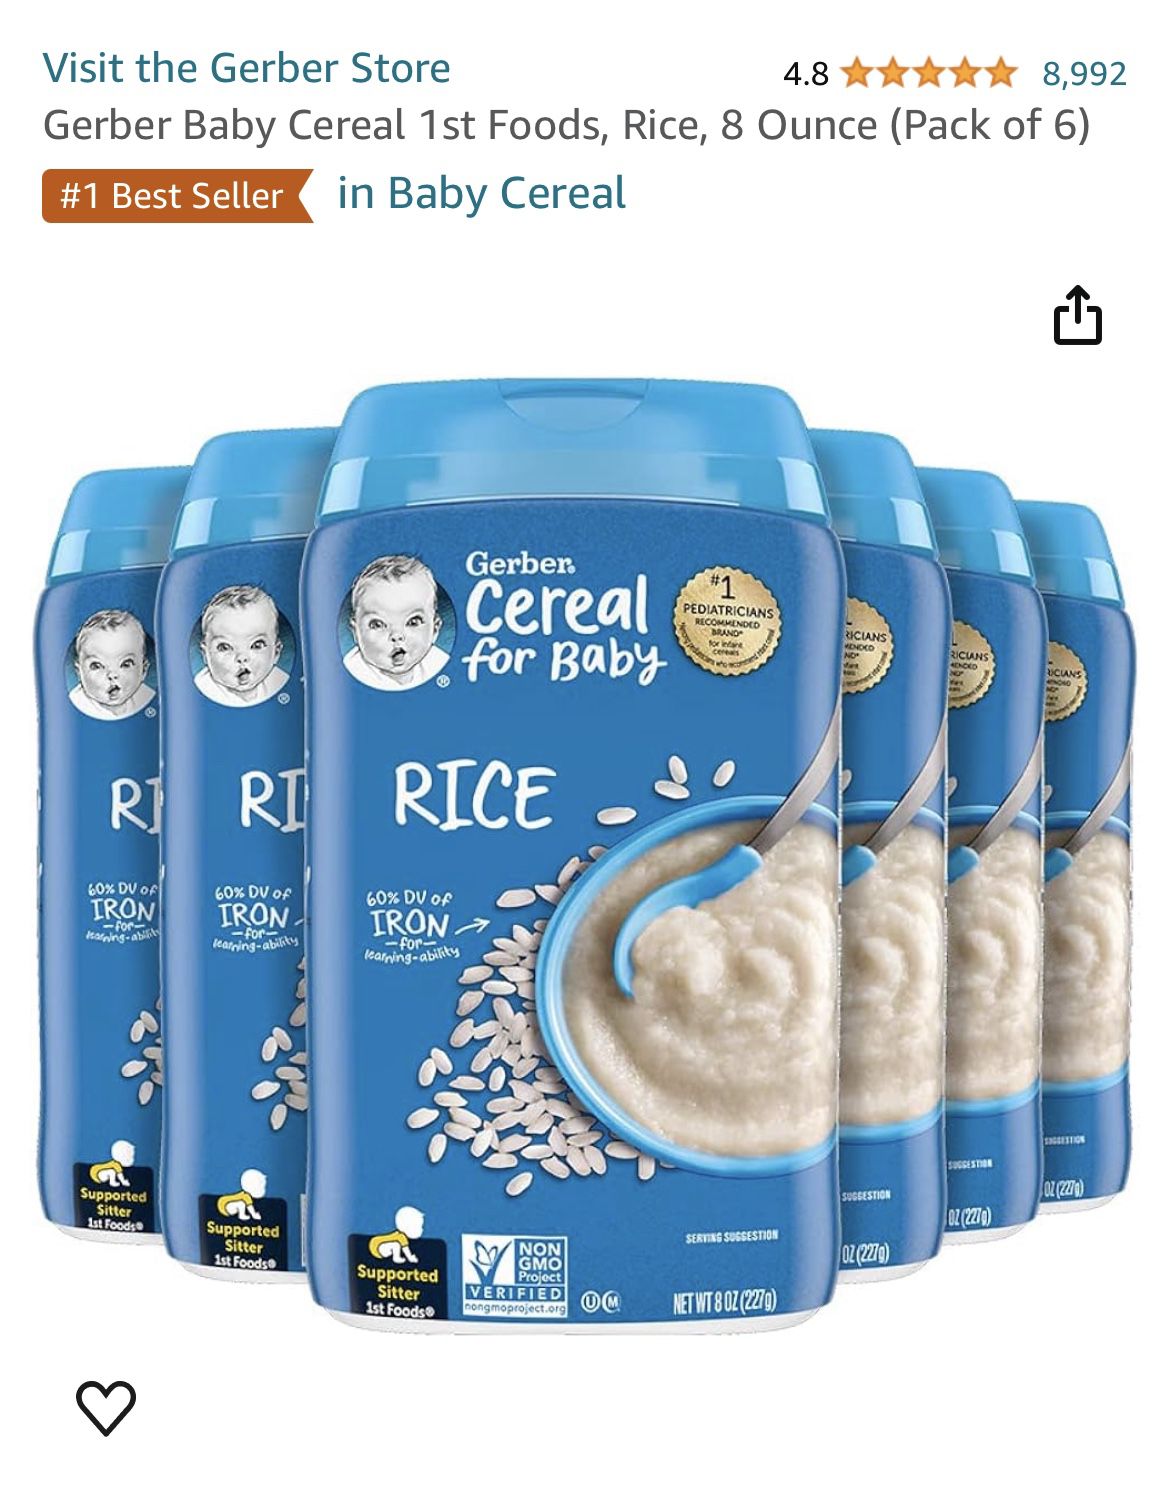 Gerber baby rice cereal - Iron Rich